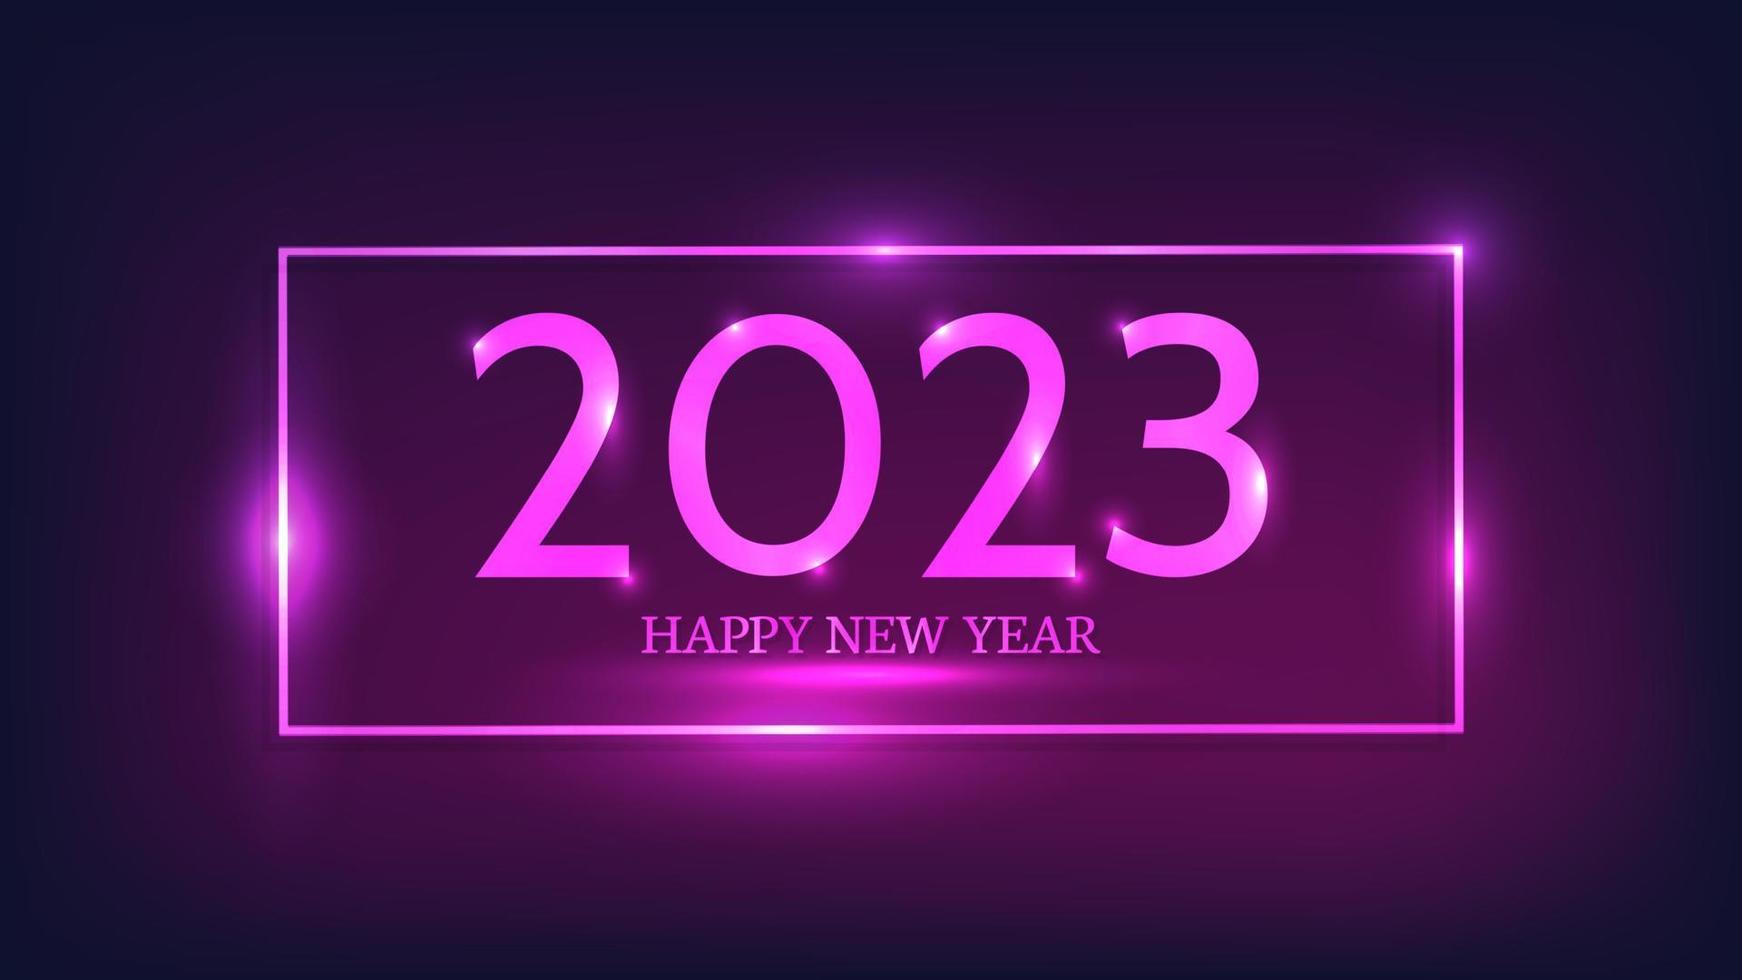 2023 Happy New Year neon background. Neon rectangular frame with shining effects for Christmas holiday greeting card, flyers or posters. Vector illustration